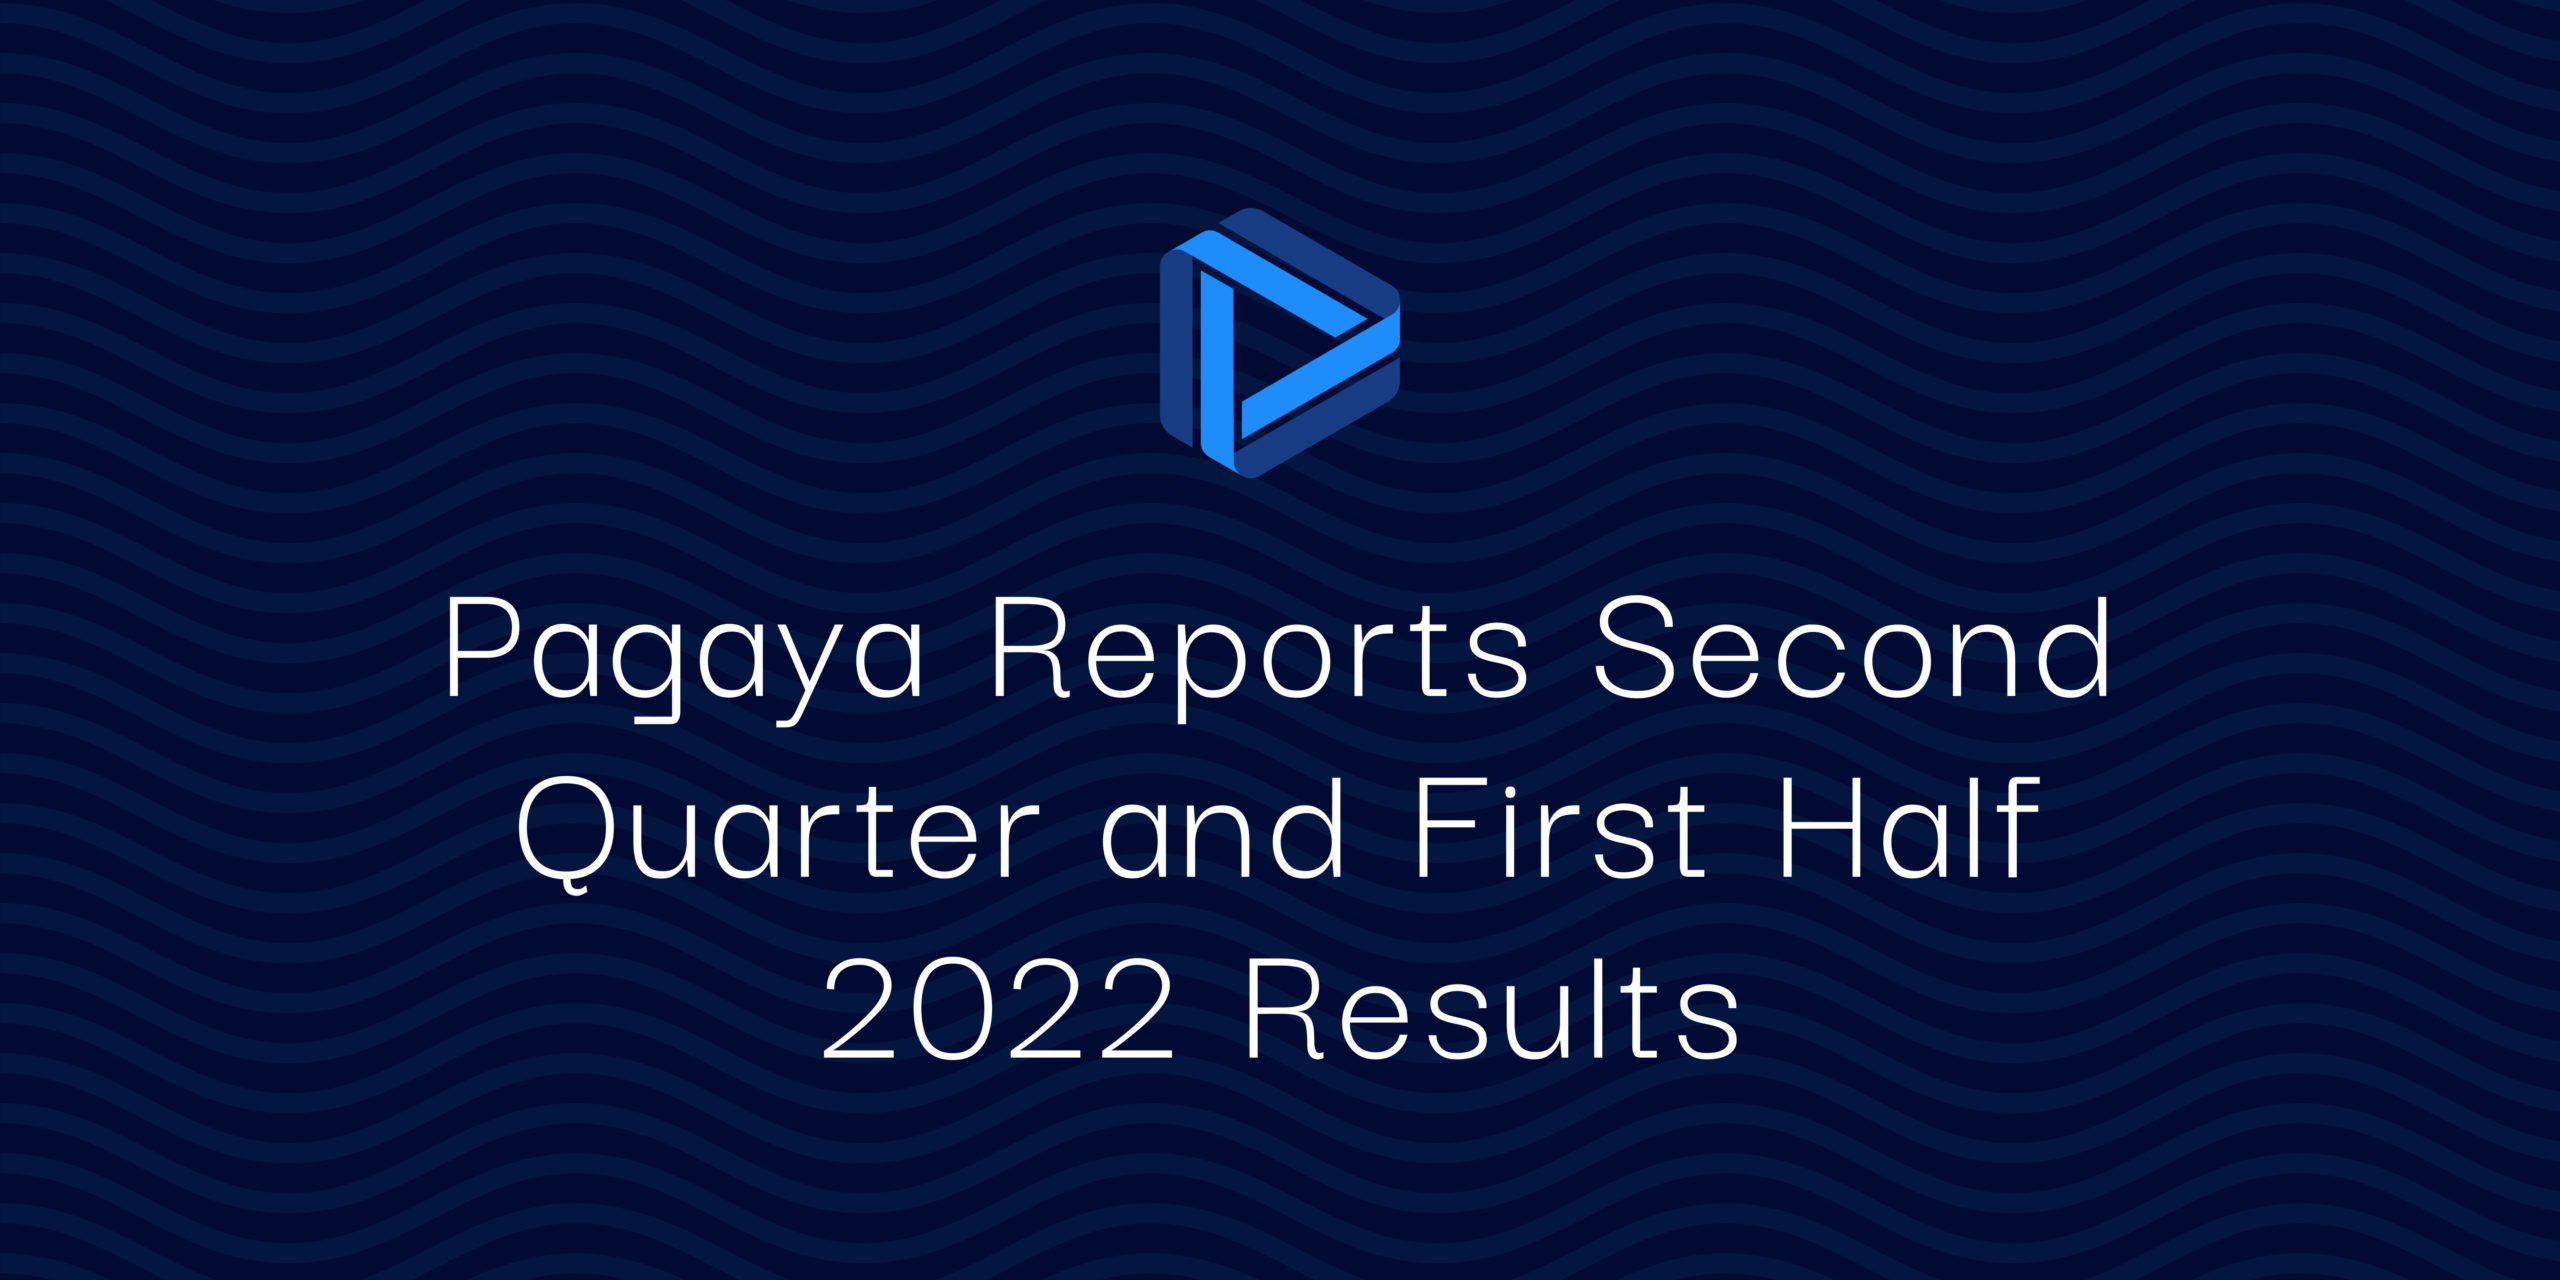 Pagaya Reports Second Quarter and First Half 2022 Results text